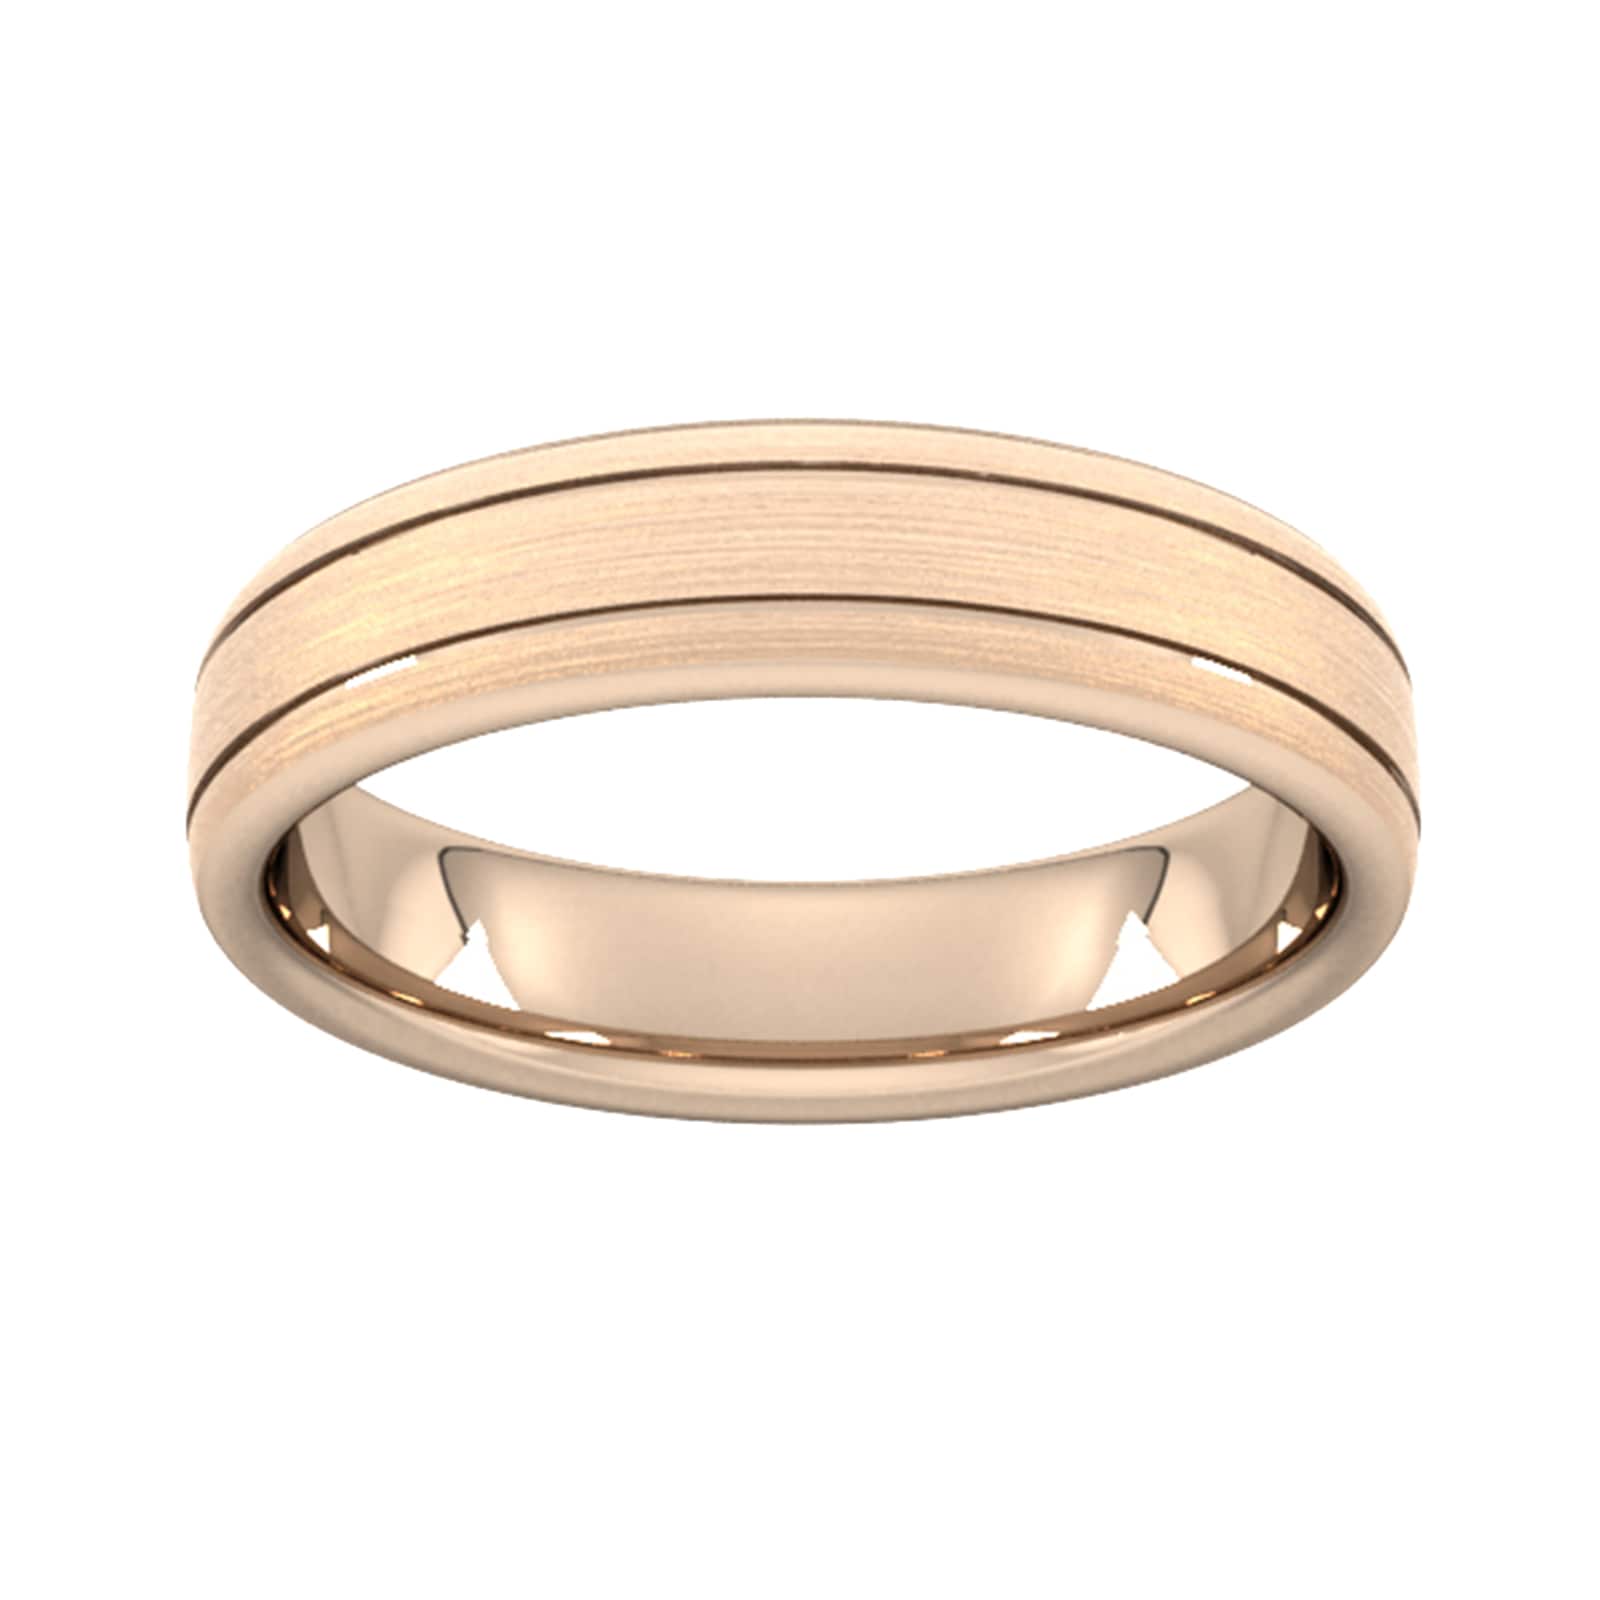 5mm Traditional Court Heavy Matt Finish With Double Grooves Wedding Ring In 9 Carat Rose Gold - Ring Size I